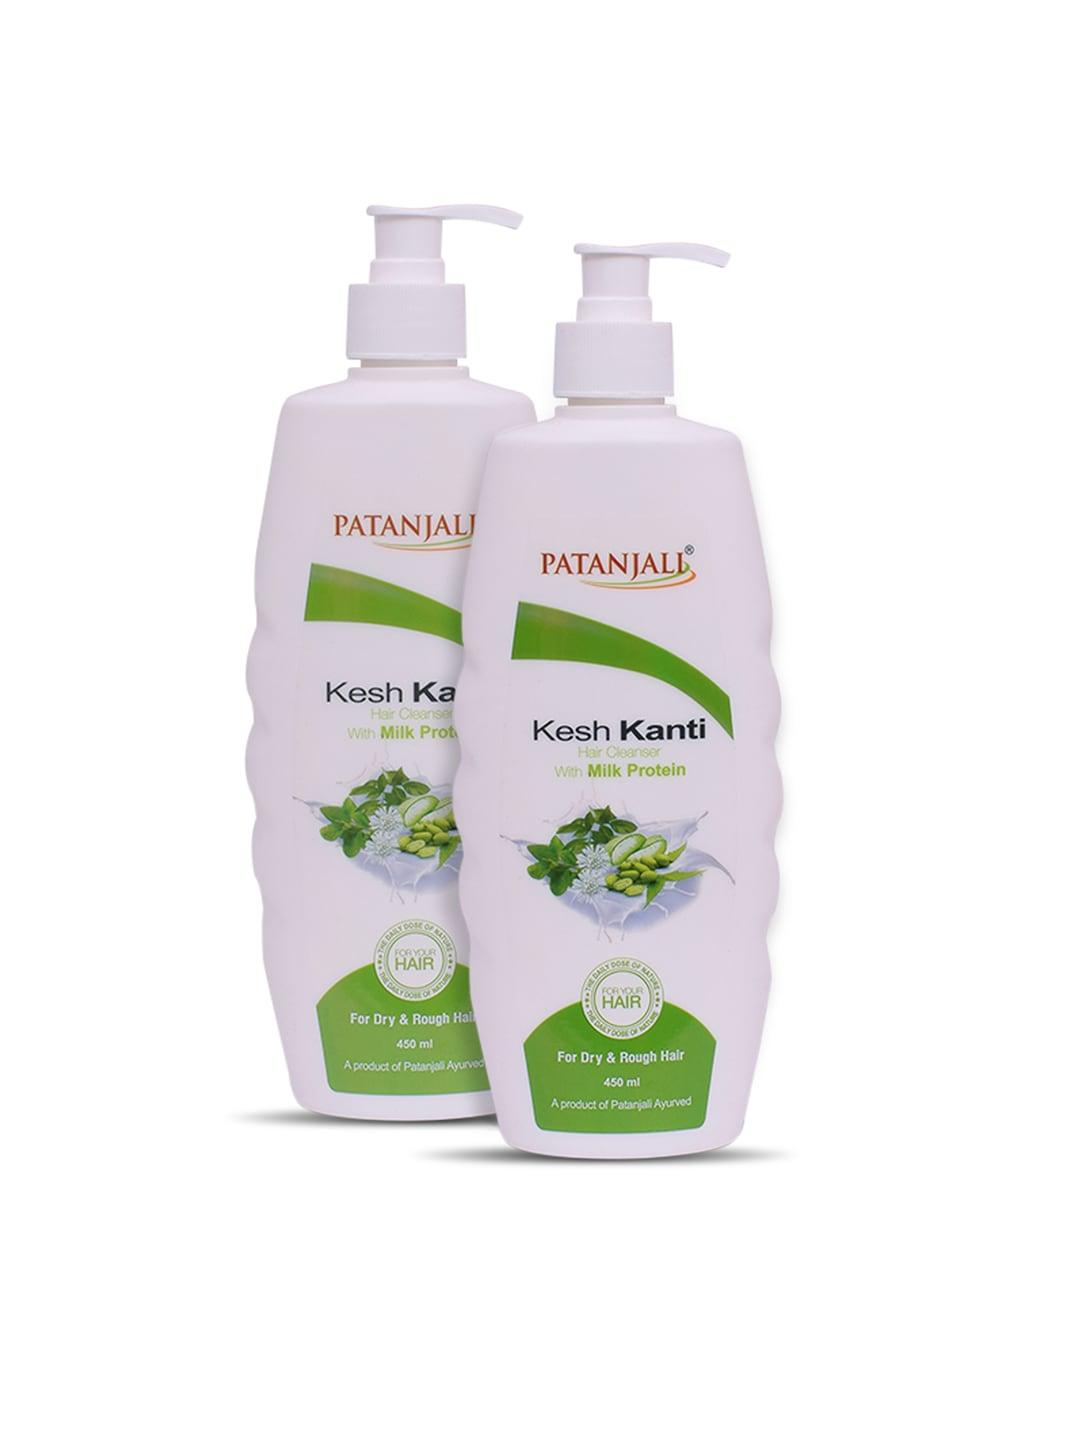 patanjali set of 2 kesh kanti hair cleanser with milk protein for dry hair - 450 ml each